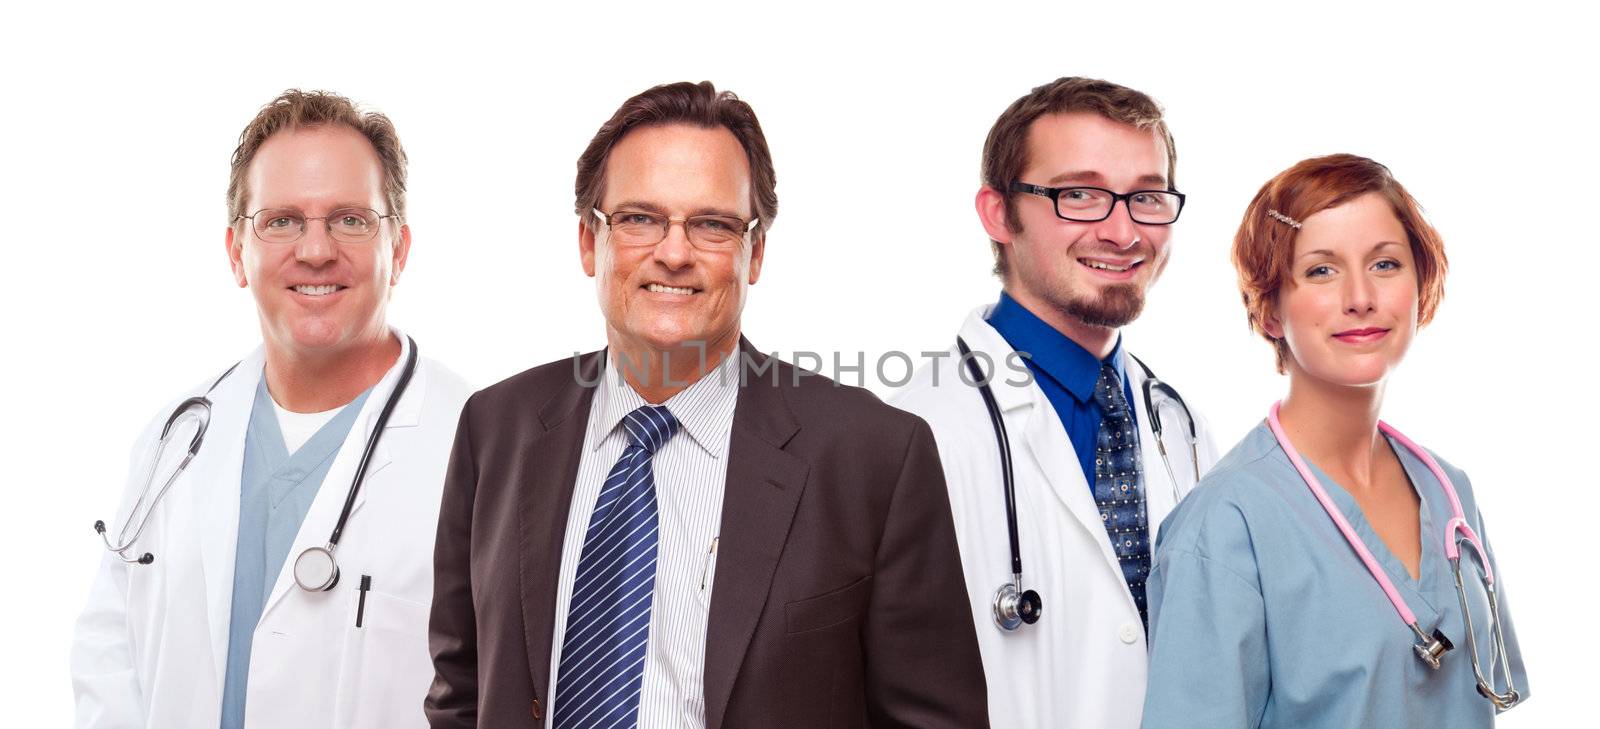 Smiling Businessman with Doctors and Nurses by Feverpitched